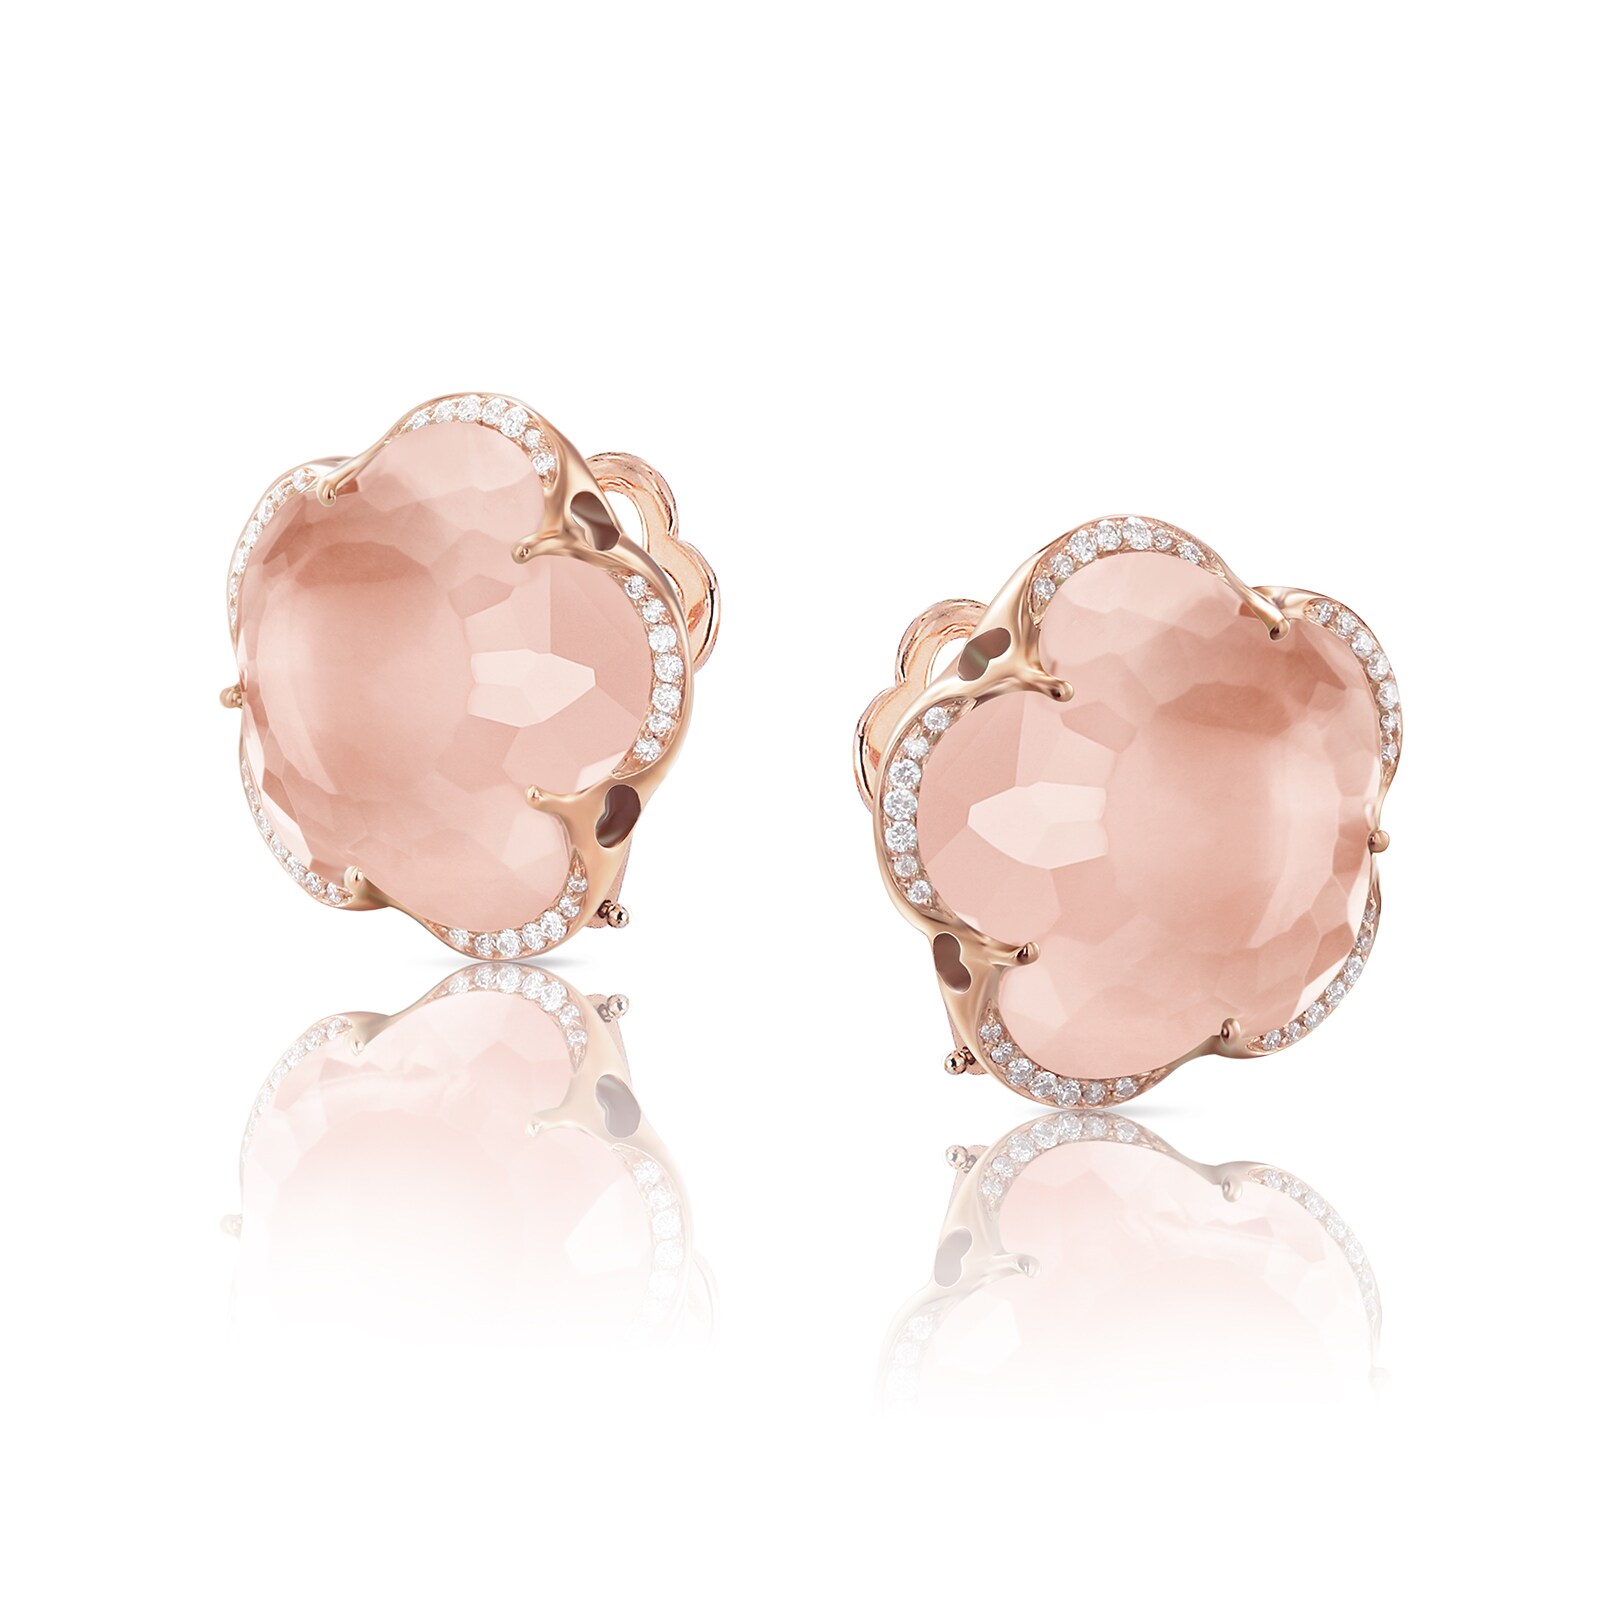 Bon Ton Stud Earrings in 18ct Rose Gold with Rose Quartz and Diamonds